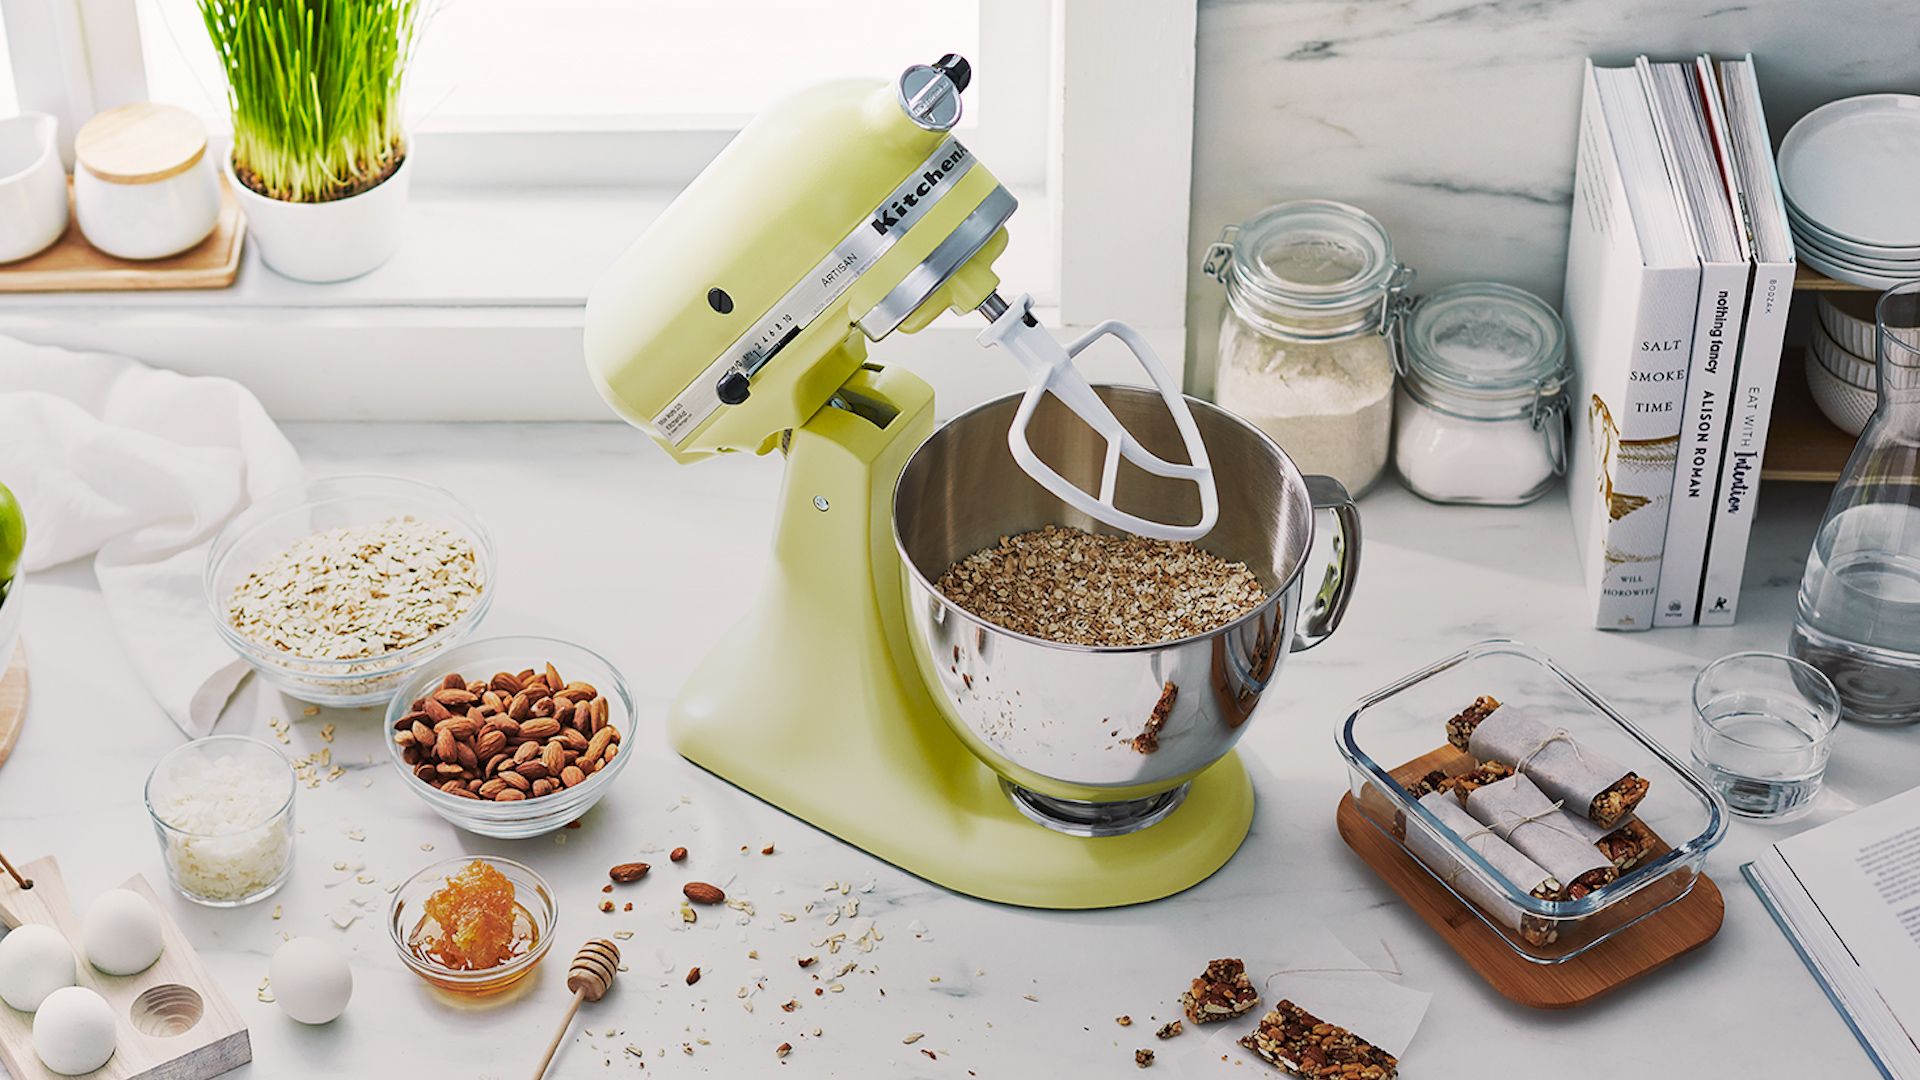 KitchenAid Now Offers Customized Stand Mixers, and They're Here Just in  Time for Holiday Gifting and Baking